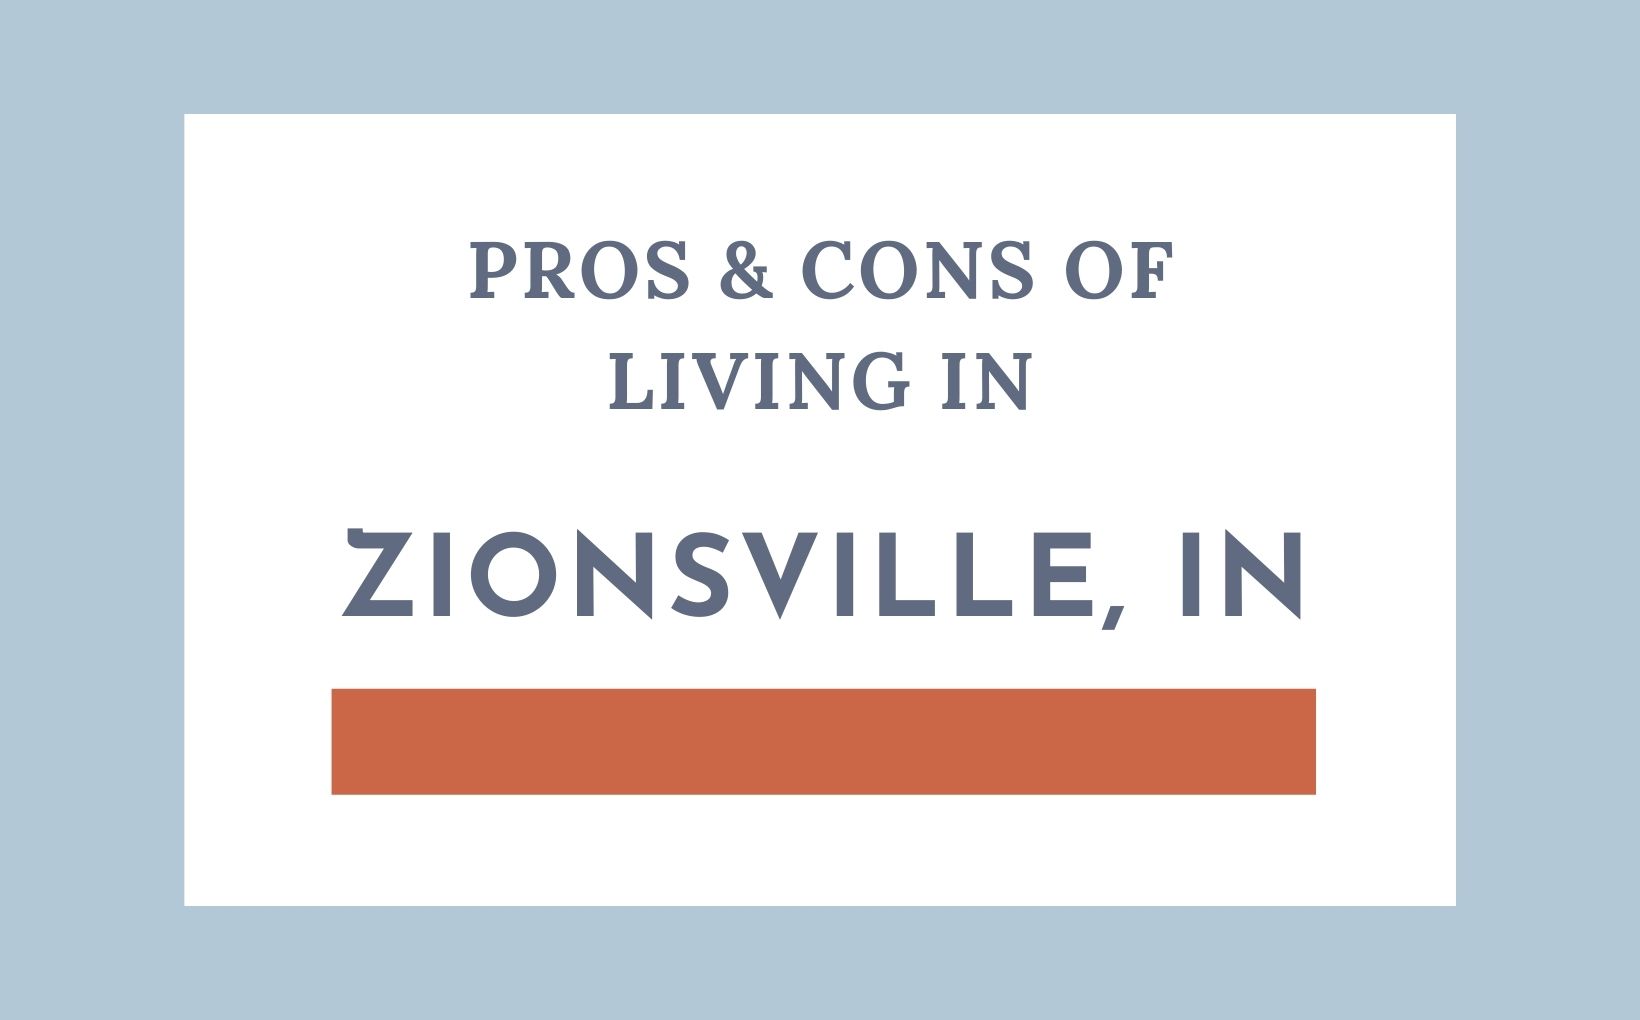 Pros & Cons of Living in Zionsville, Indiana feature image